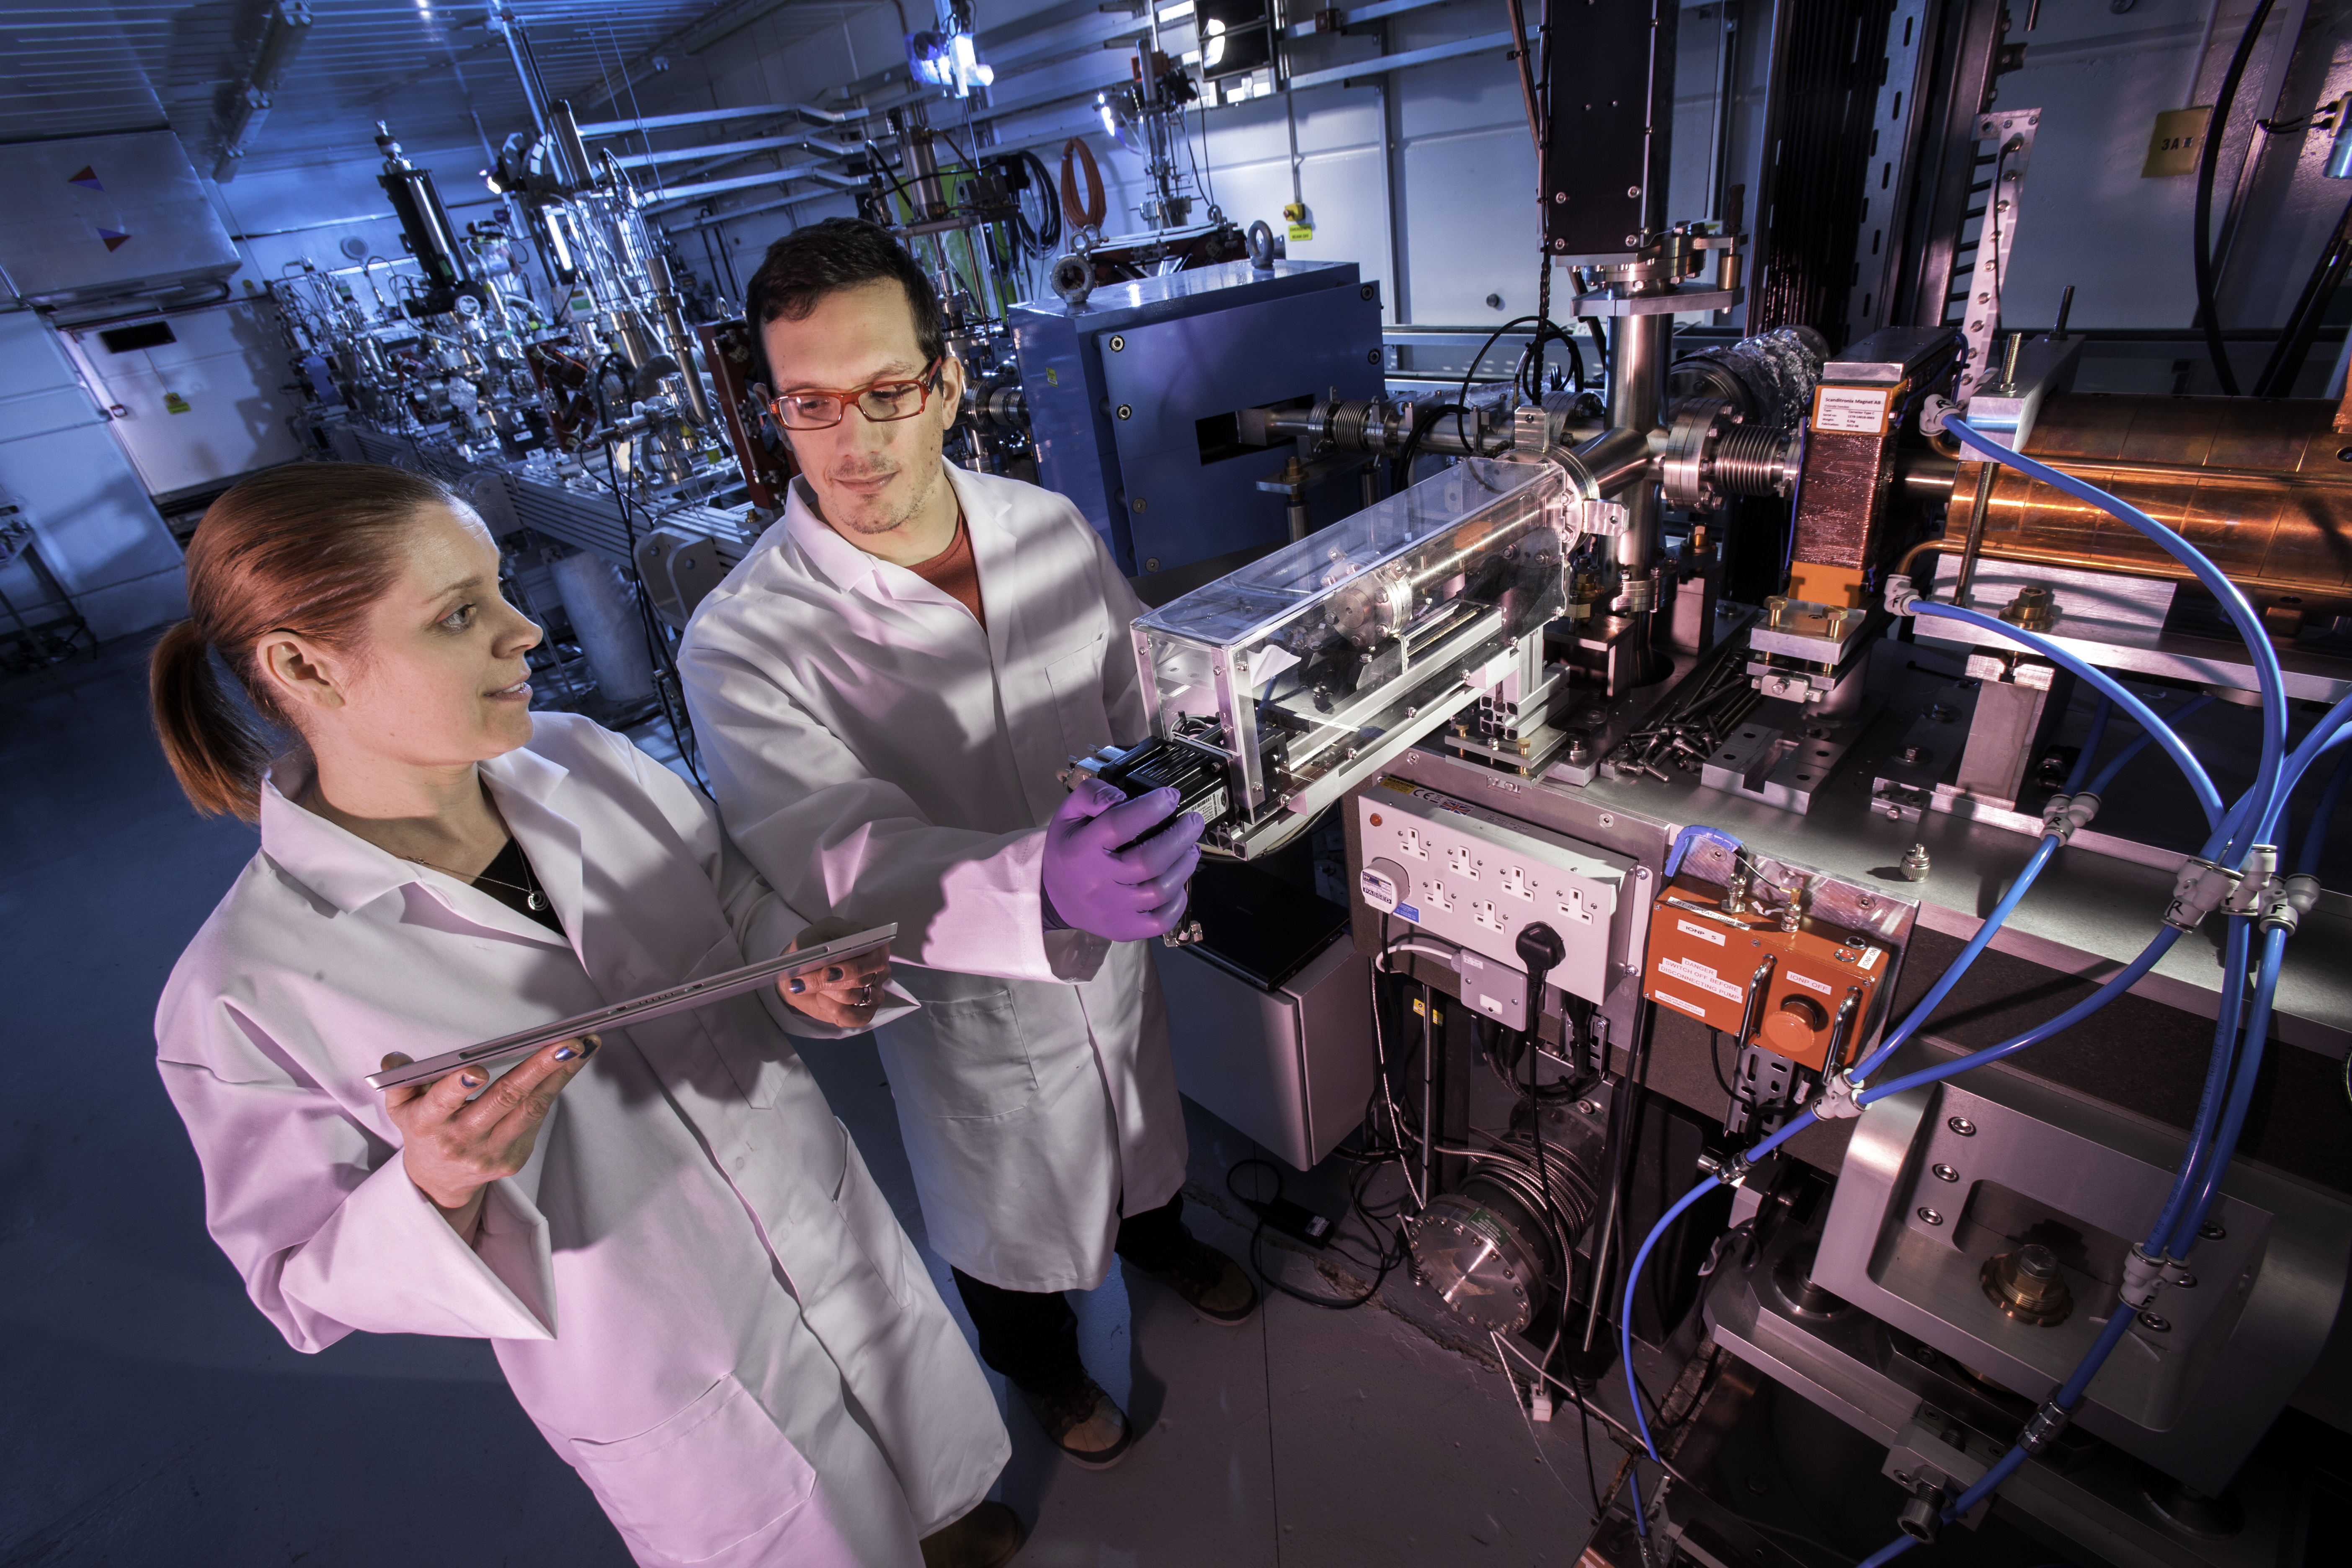 Two people stood alongside a particle accelerator